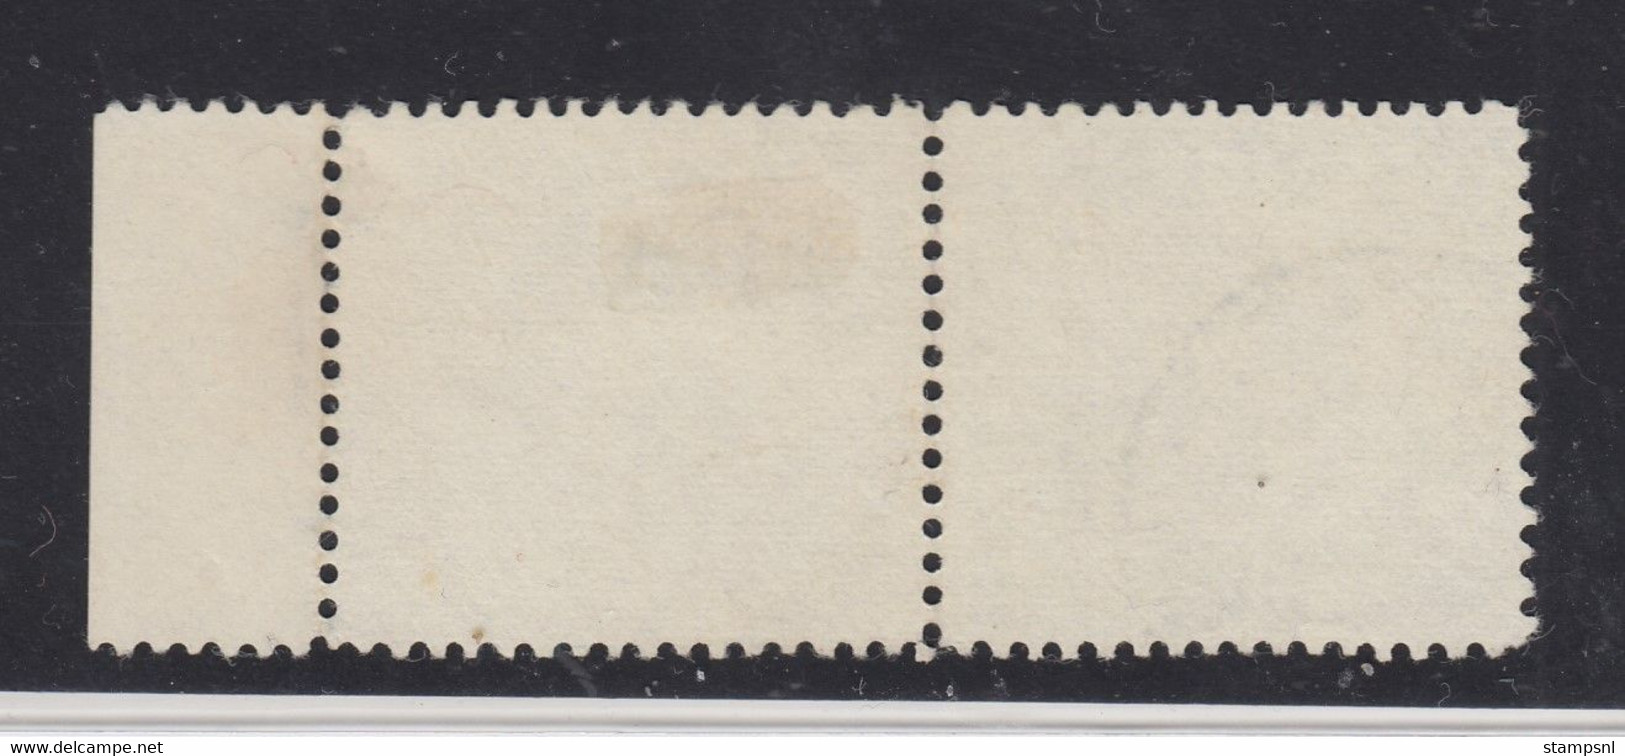 Israel - 1949 - 40m - Yv 17 With Tab - Used - Oblitérés (avec Tabs)